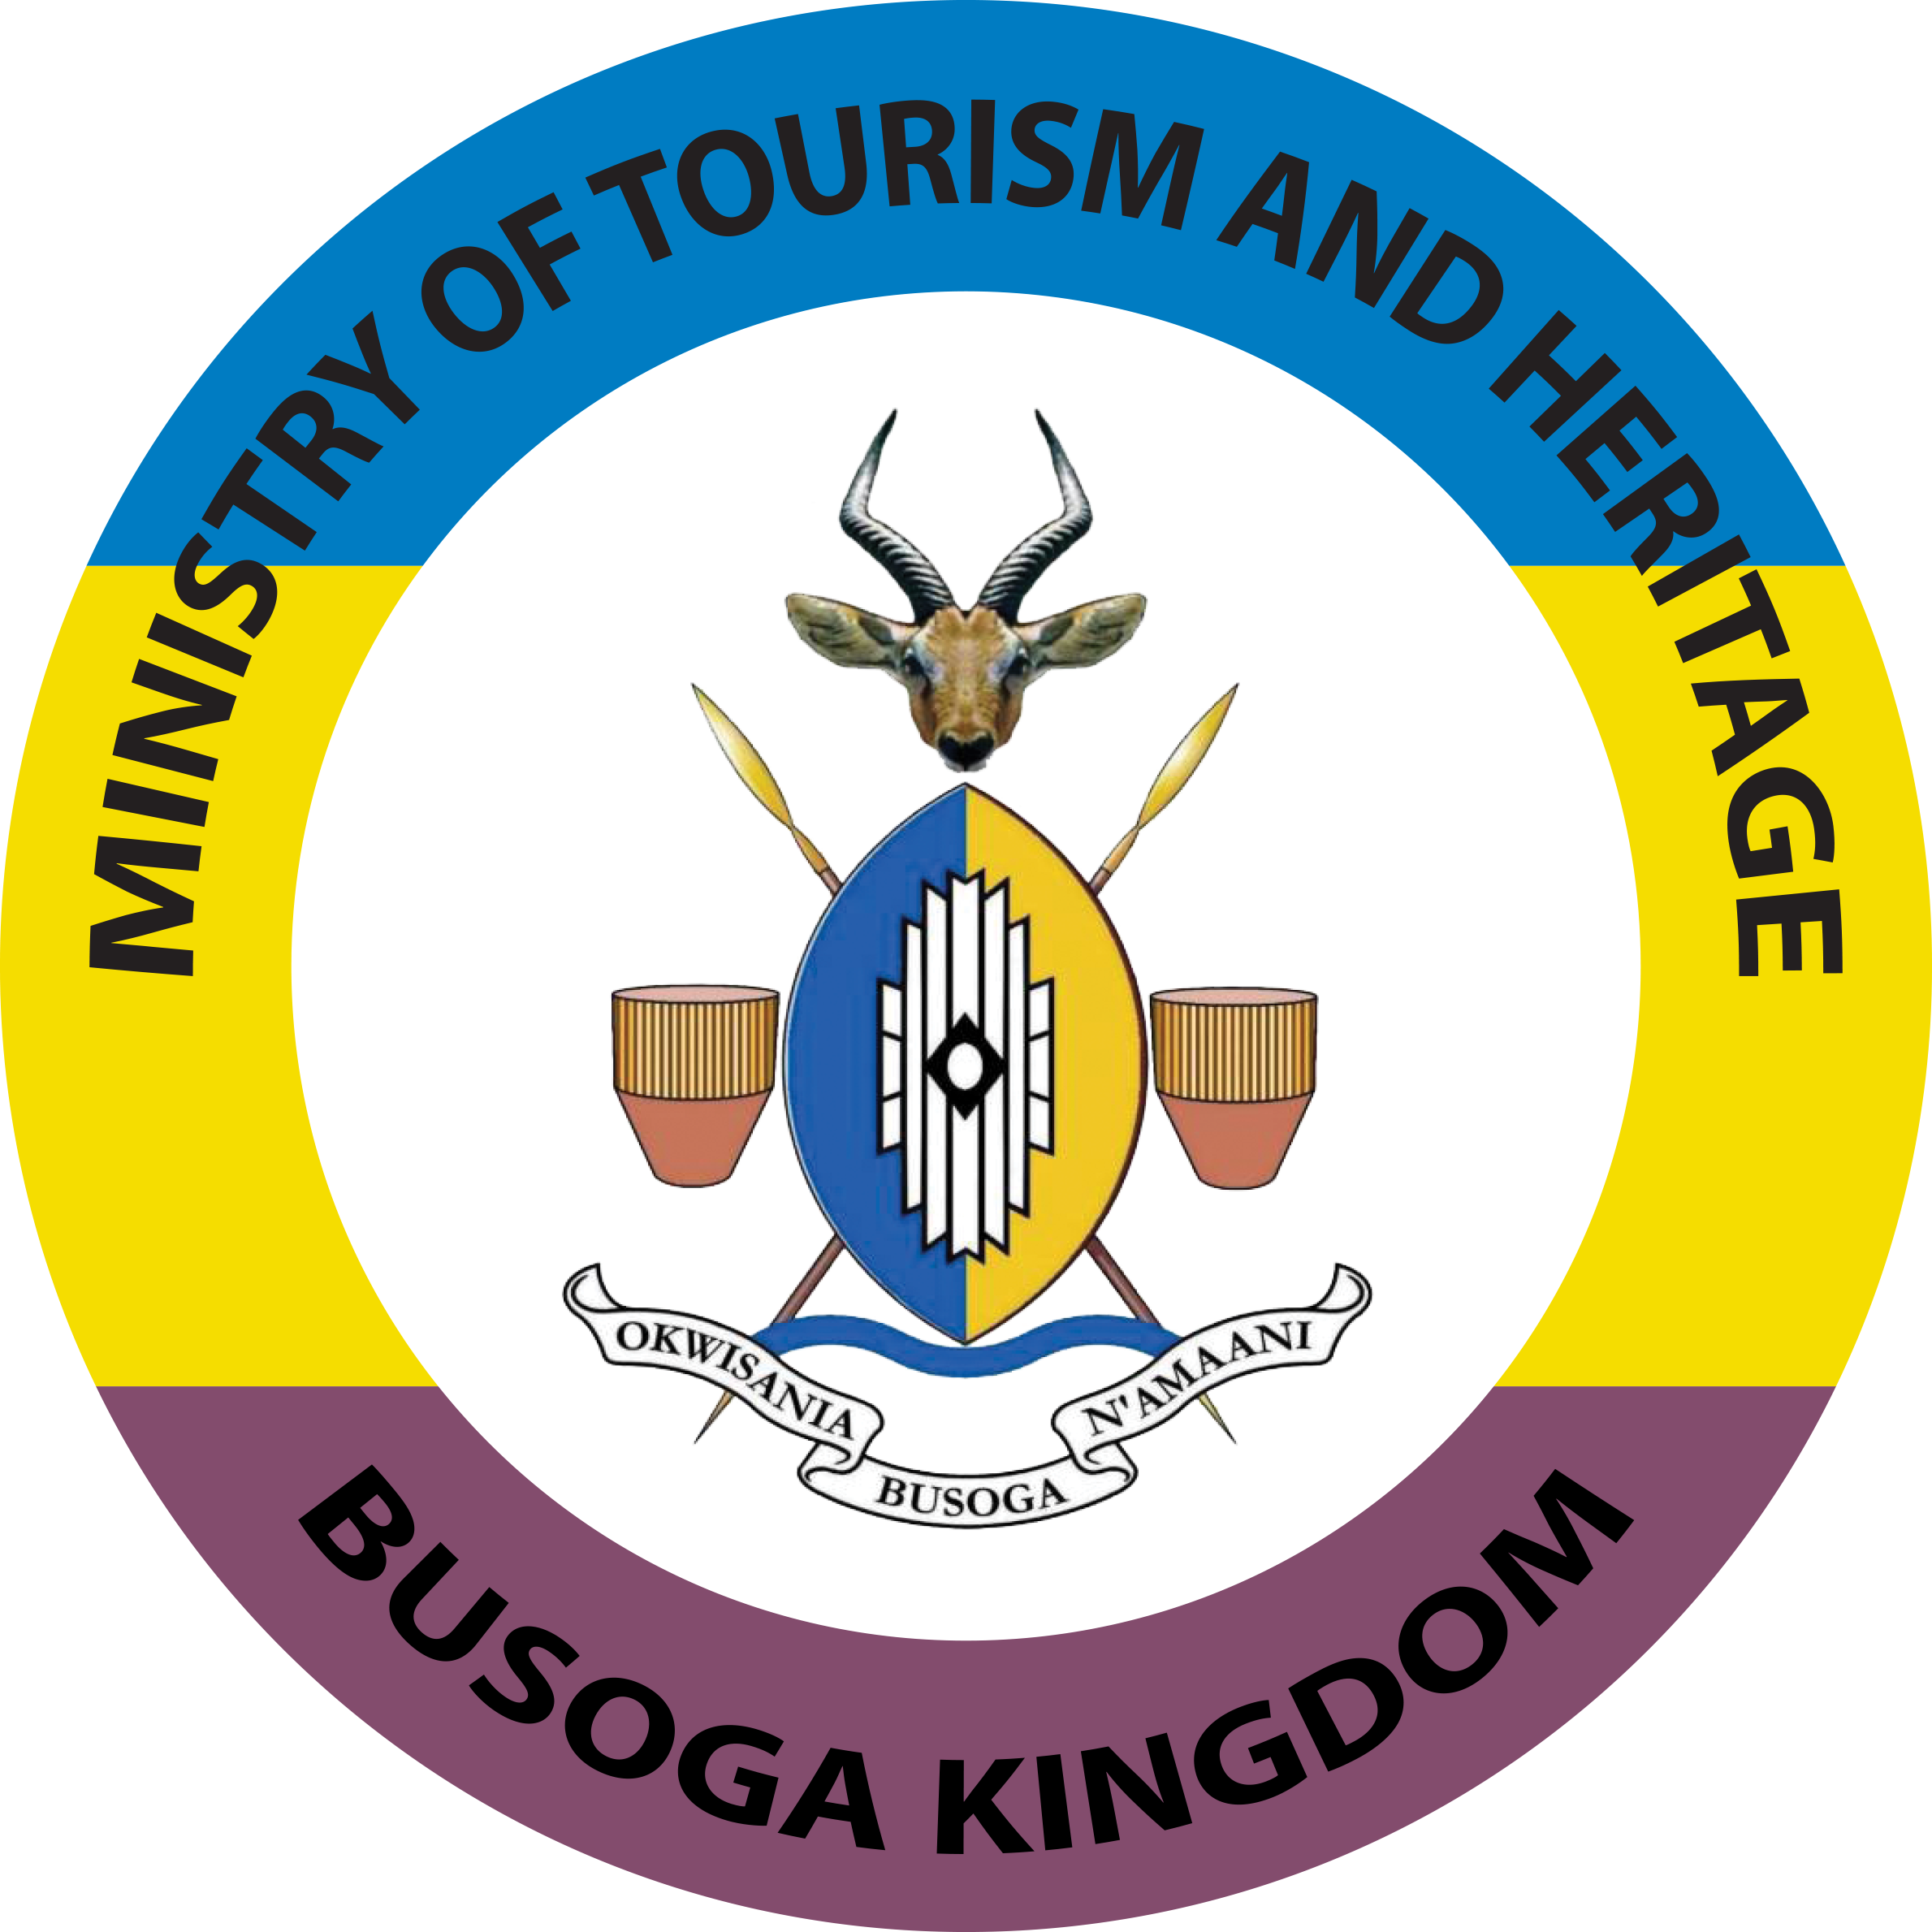 Visit Busoga | Our Heritage is our Pride